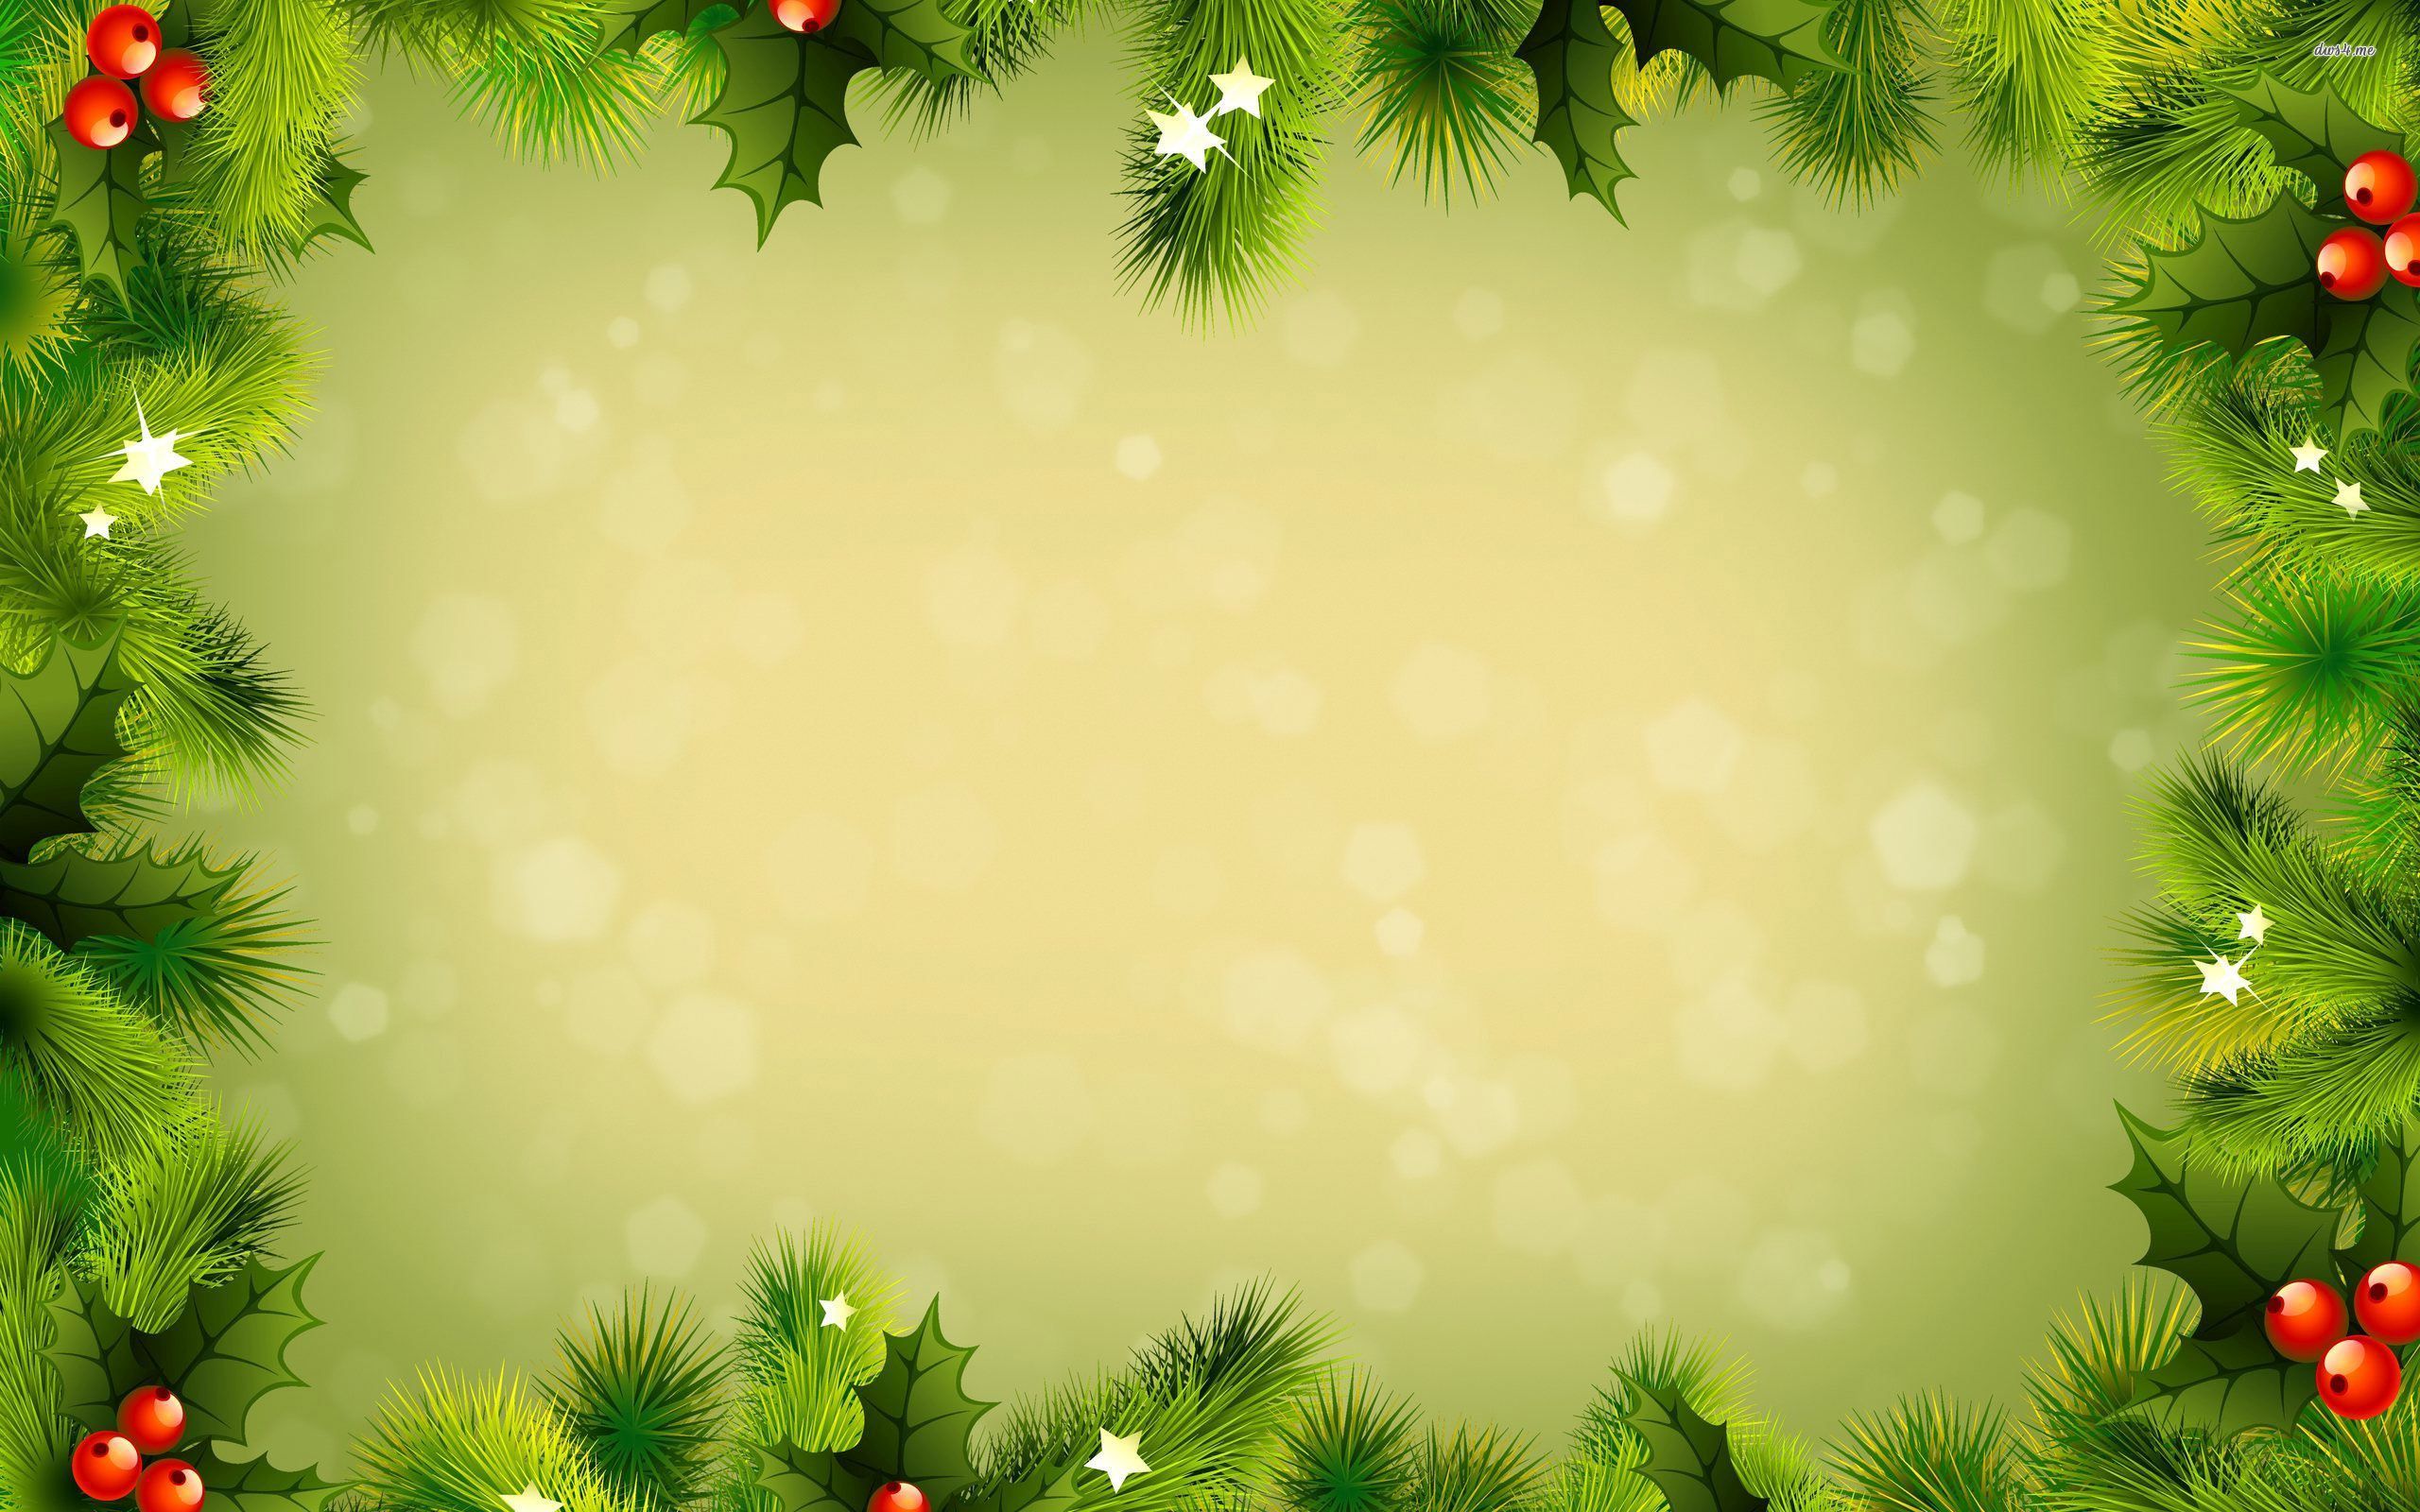 Christmas backgrounds wallpapers